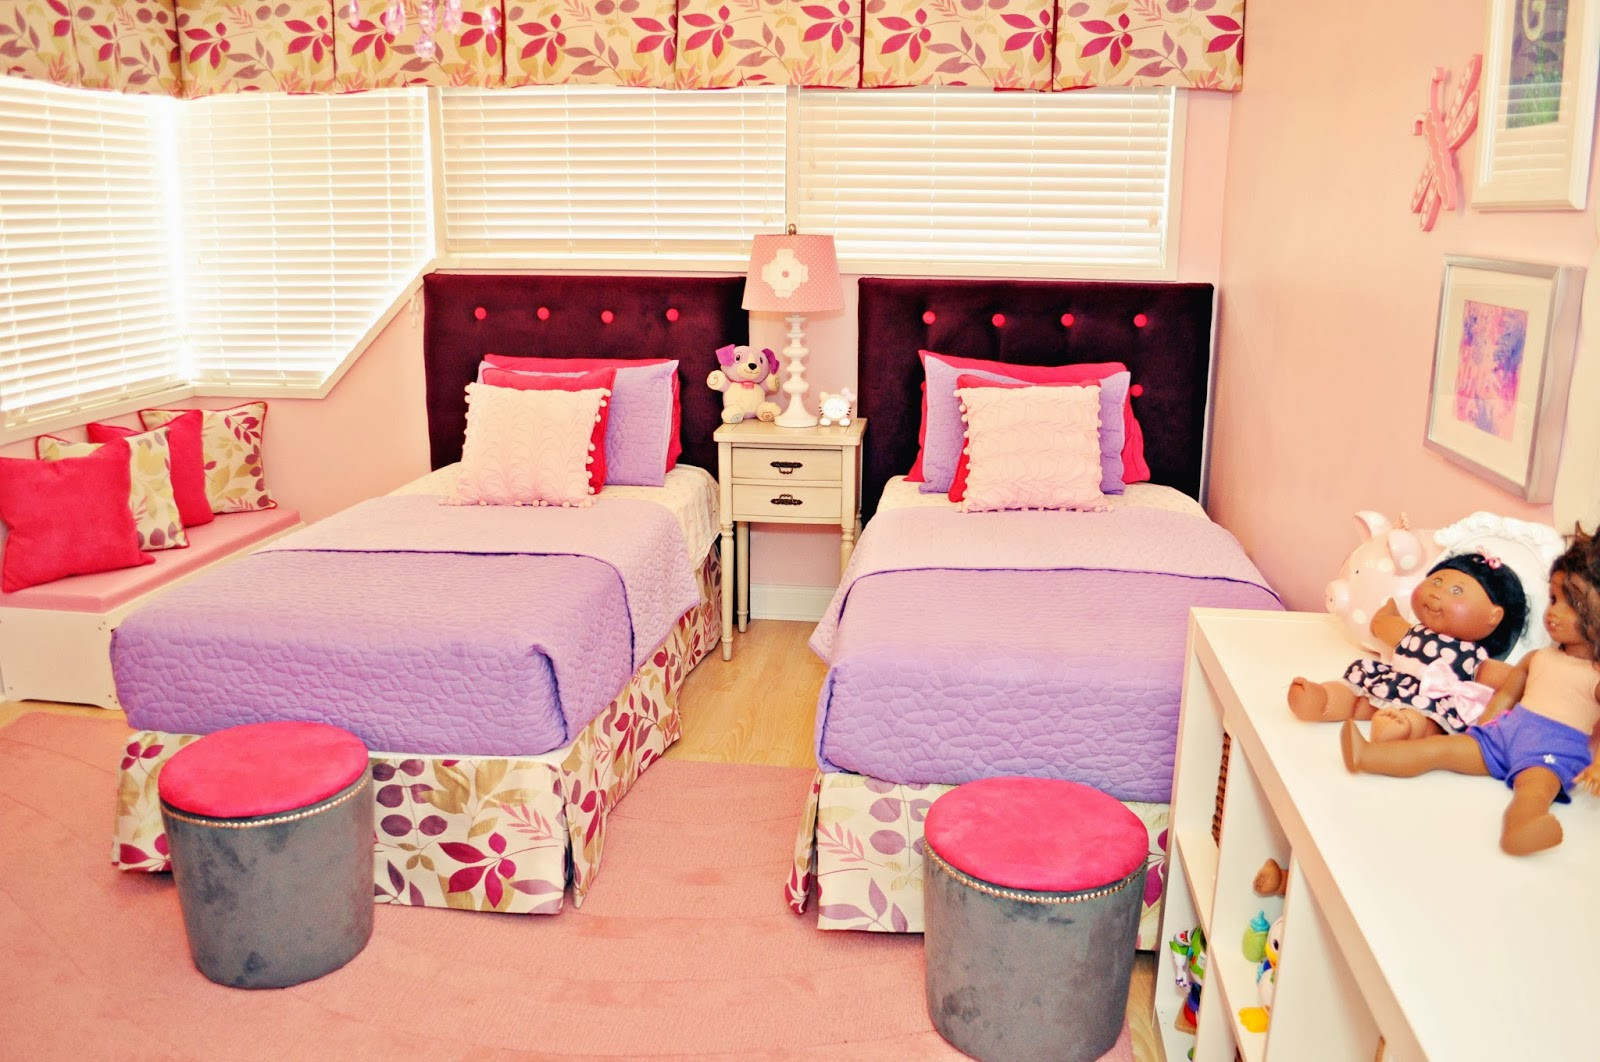 Pink And Purple Kids Room
 Live Laugh Decorate Pink Meets Purple in Our Kids Room Reveal